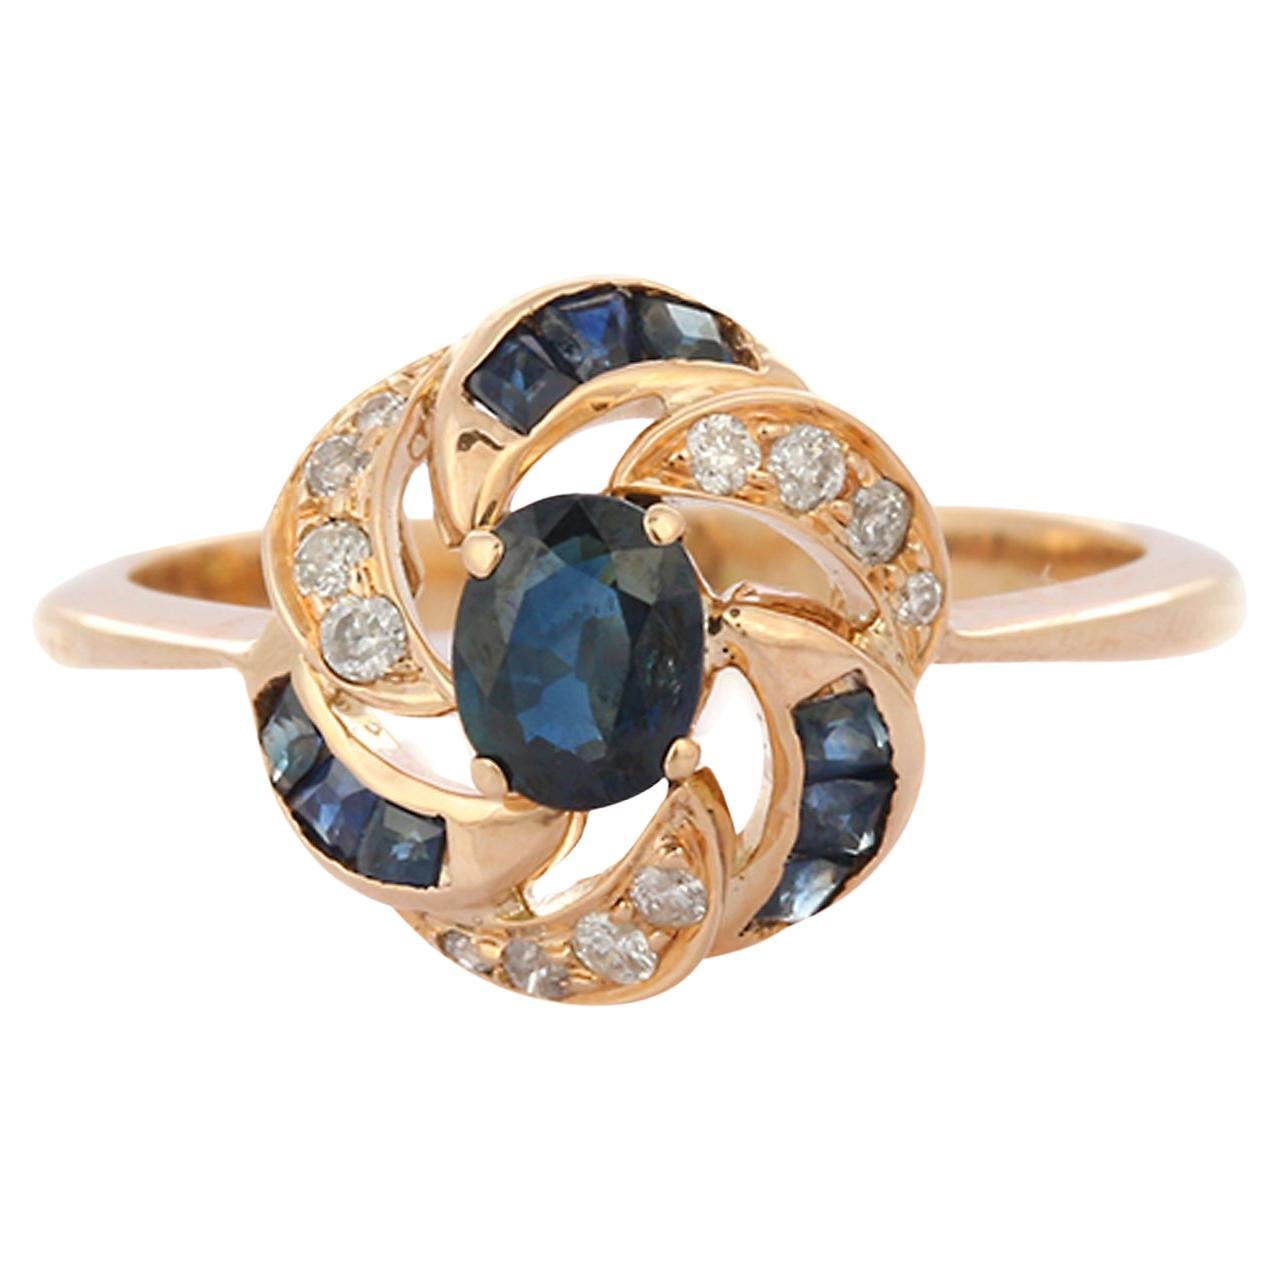 Enticing Sapphire Diamond Floral Bridal Ring in 14K Solid Yellow Gold